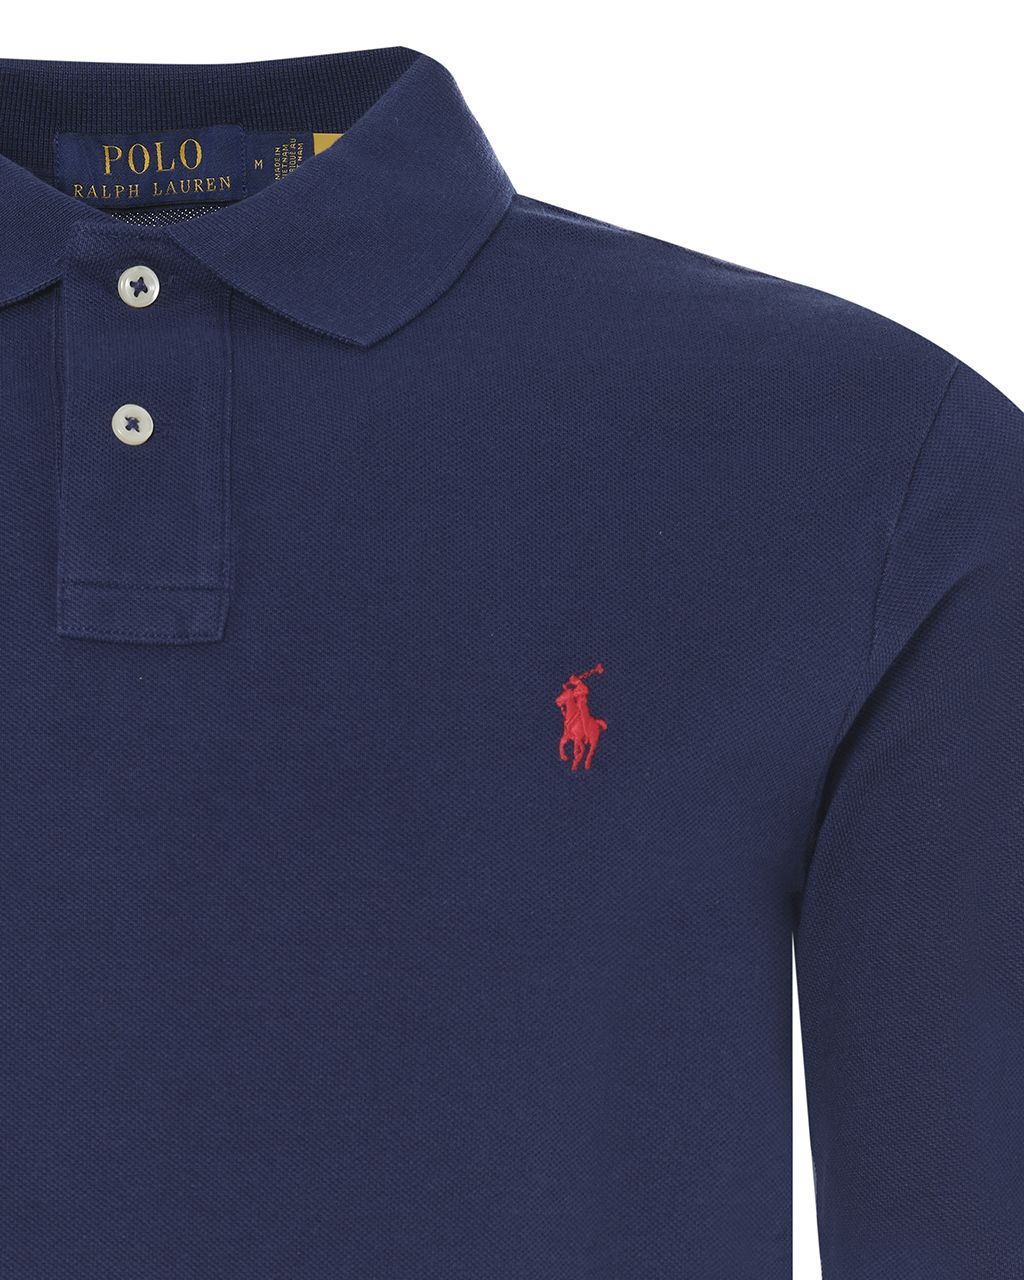 Polo Ralph Lauren Polo LM Donker blauw 078588-001-L